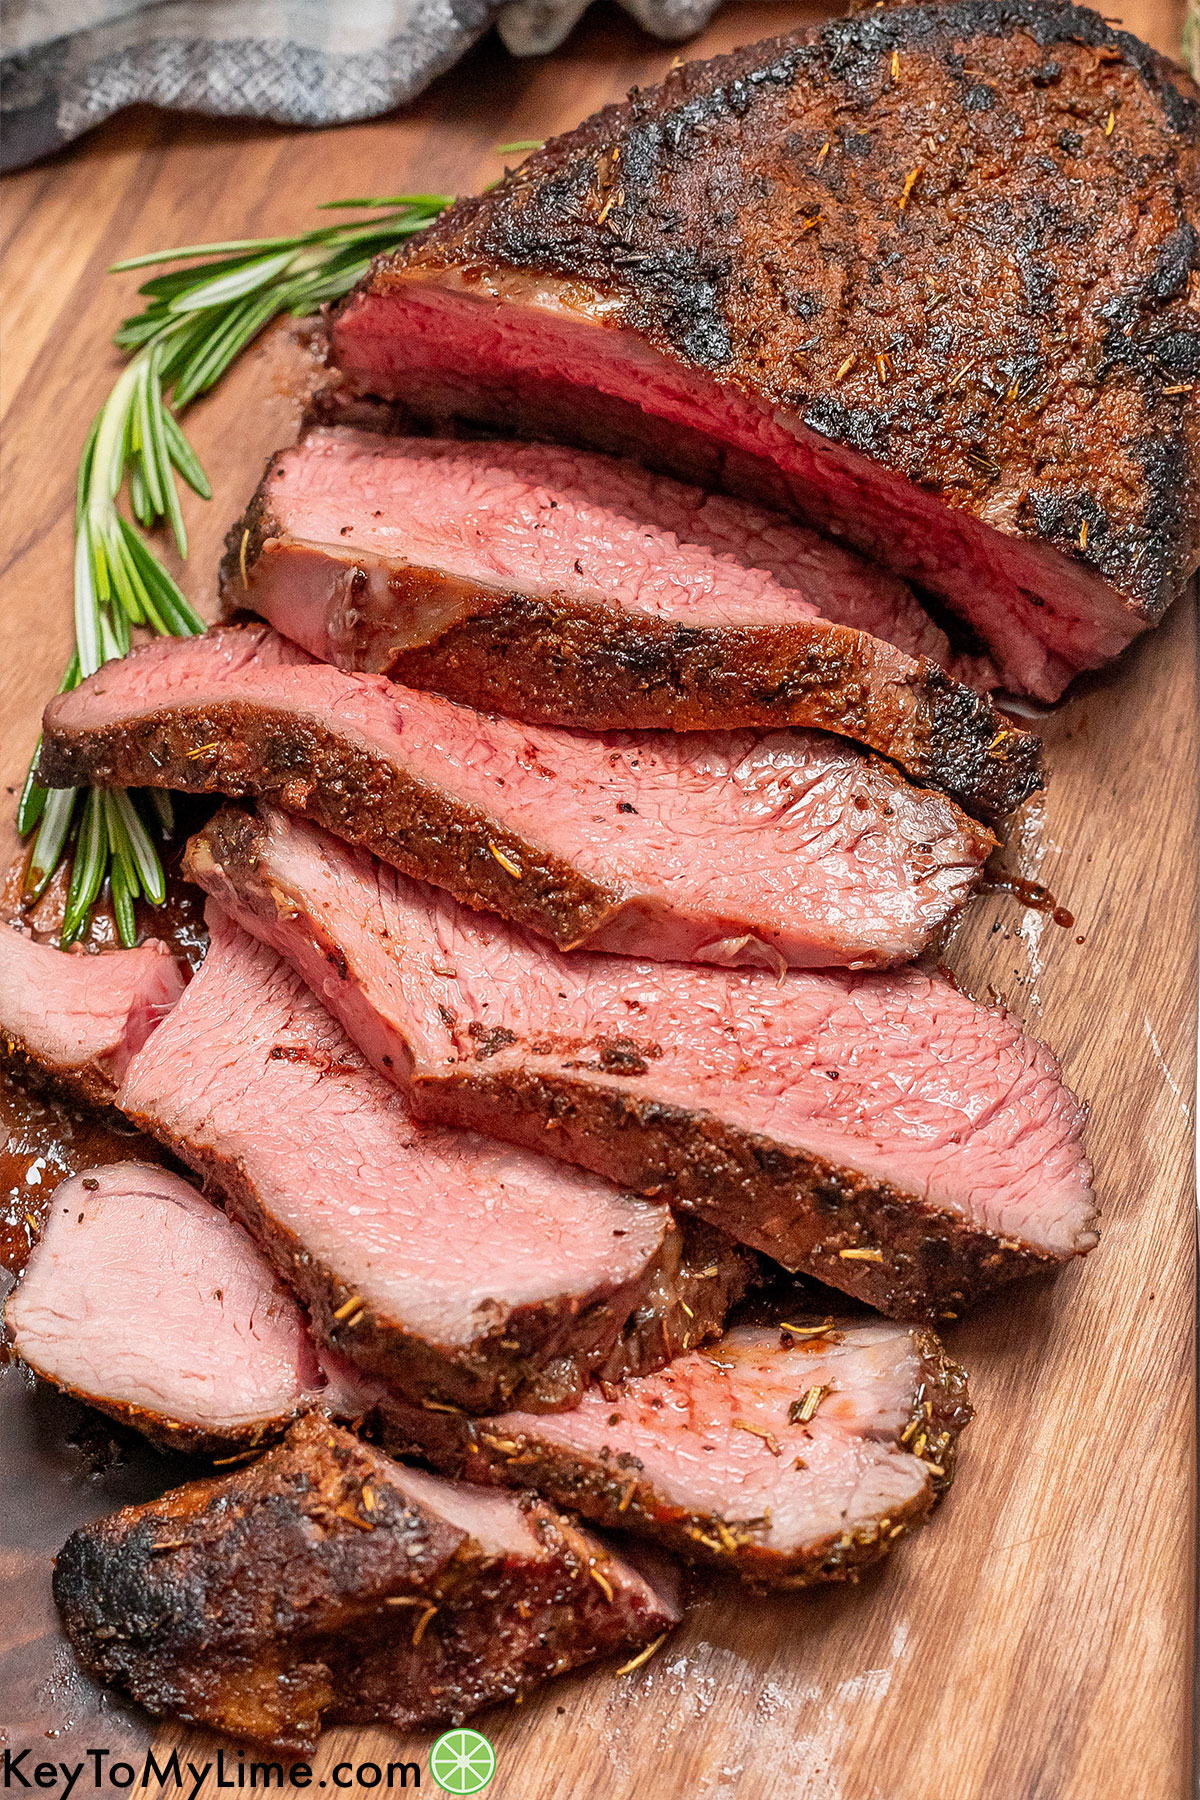 Tri tip slices staggered on a cutting board showing the seasoned bark on top.